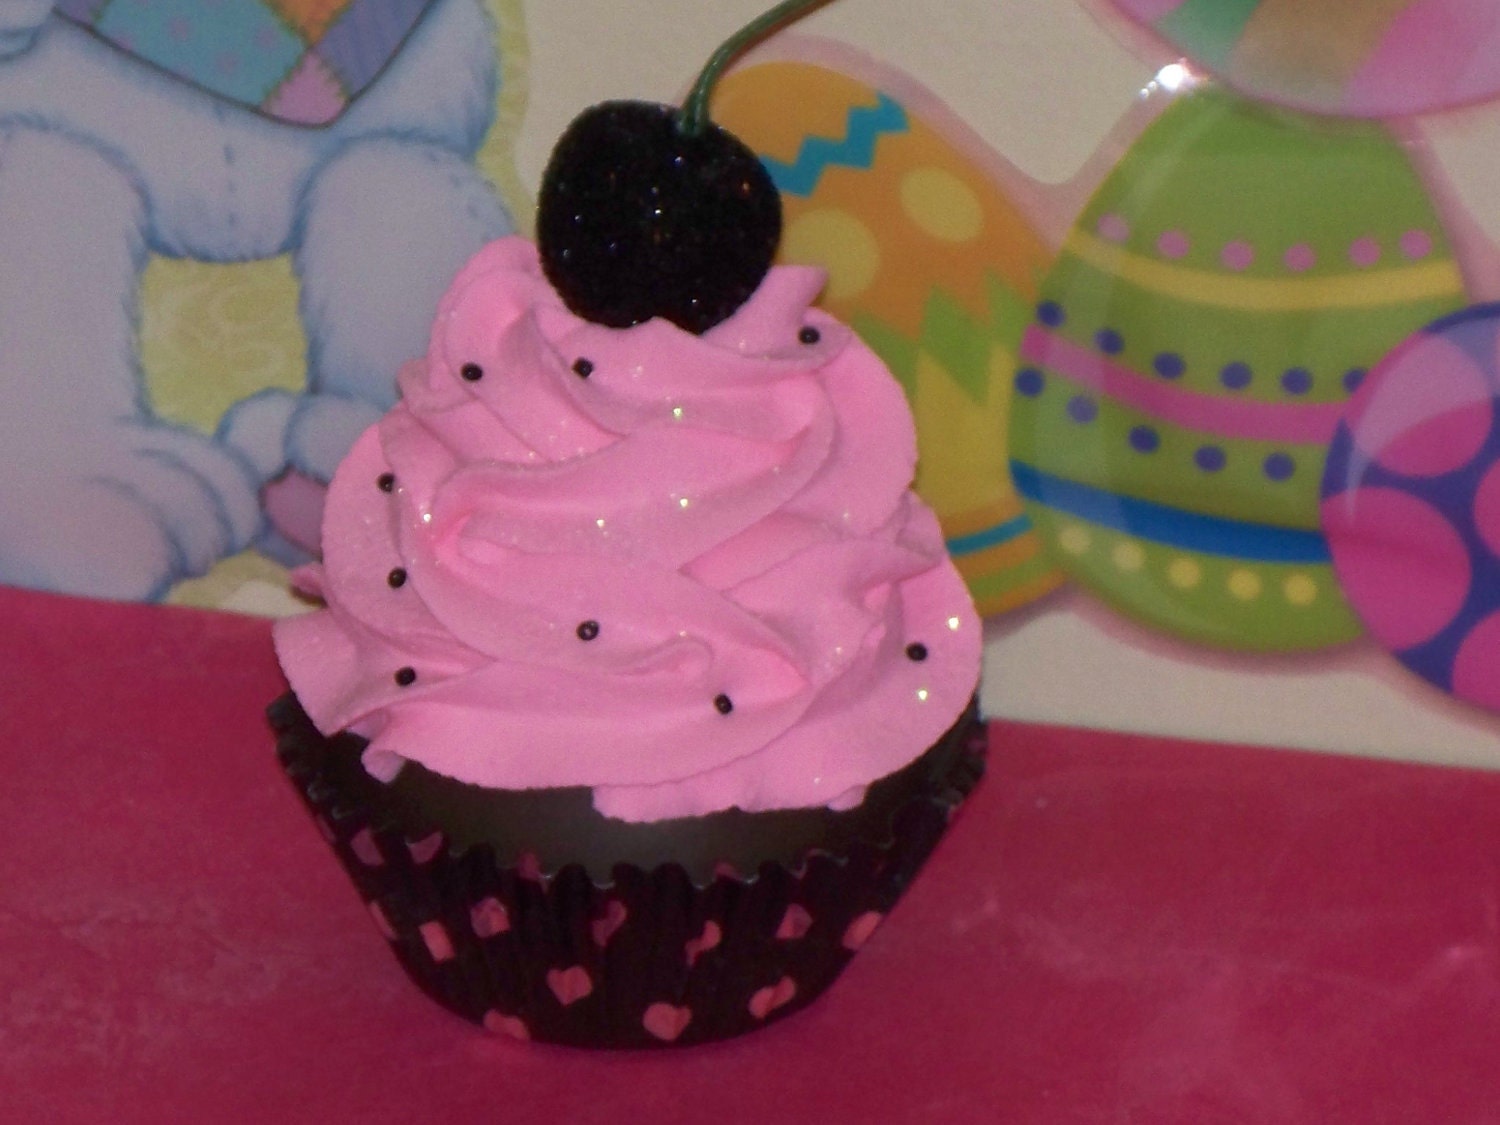 Fun Original Hot Pink and Black Polka Dot Chocolate Fake Cupcake Cherry,  Birthday Party Favor, Decor, Gift, Home, Display Stage Photo Prop